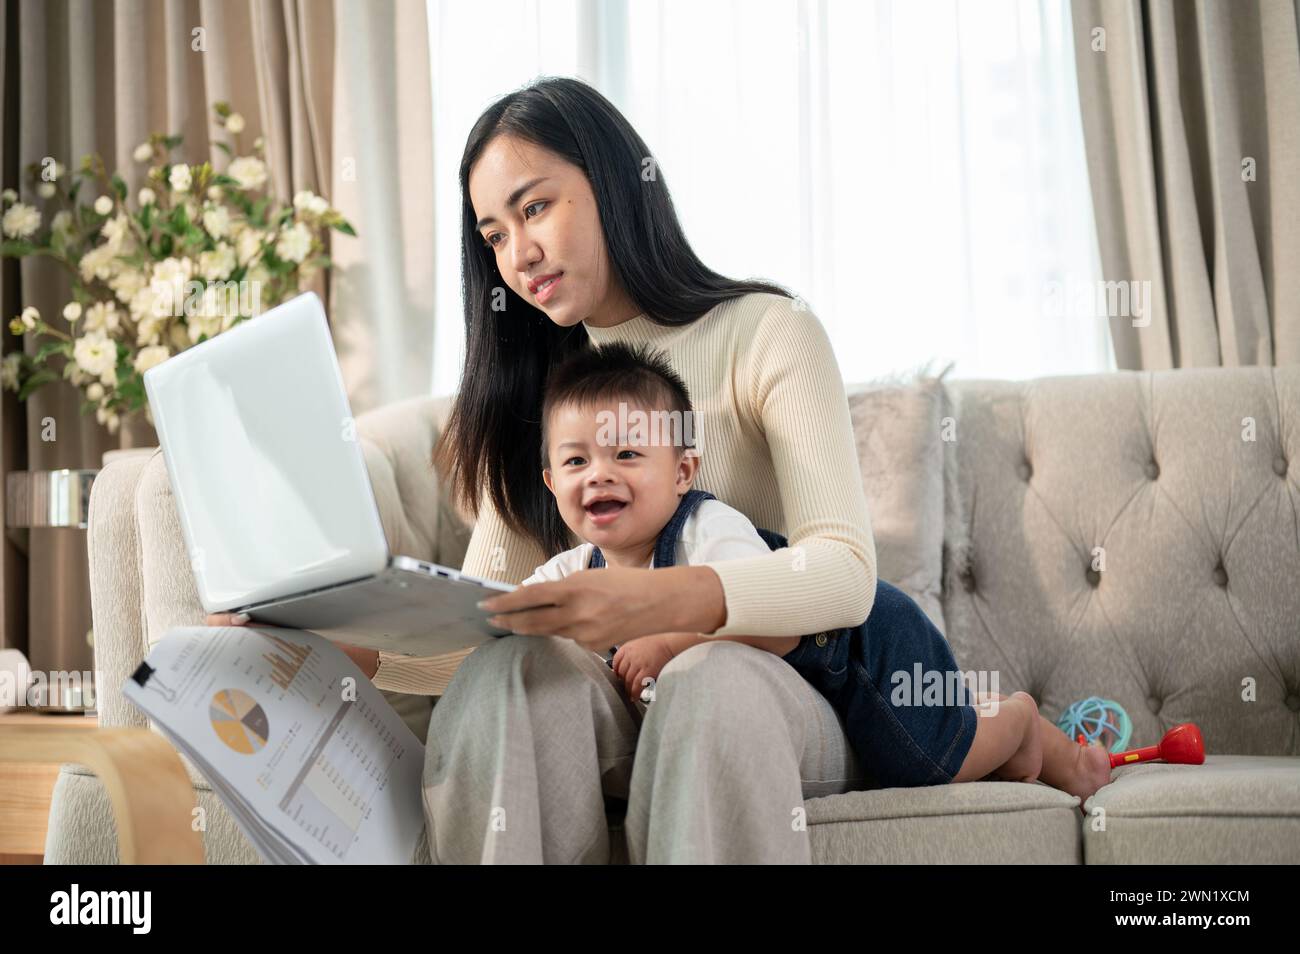 A happy Asian businesswoman mom is working from home, working on her laptop, and taking care of her naughty baby boy. Stock Photo